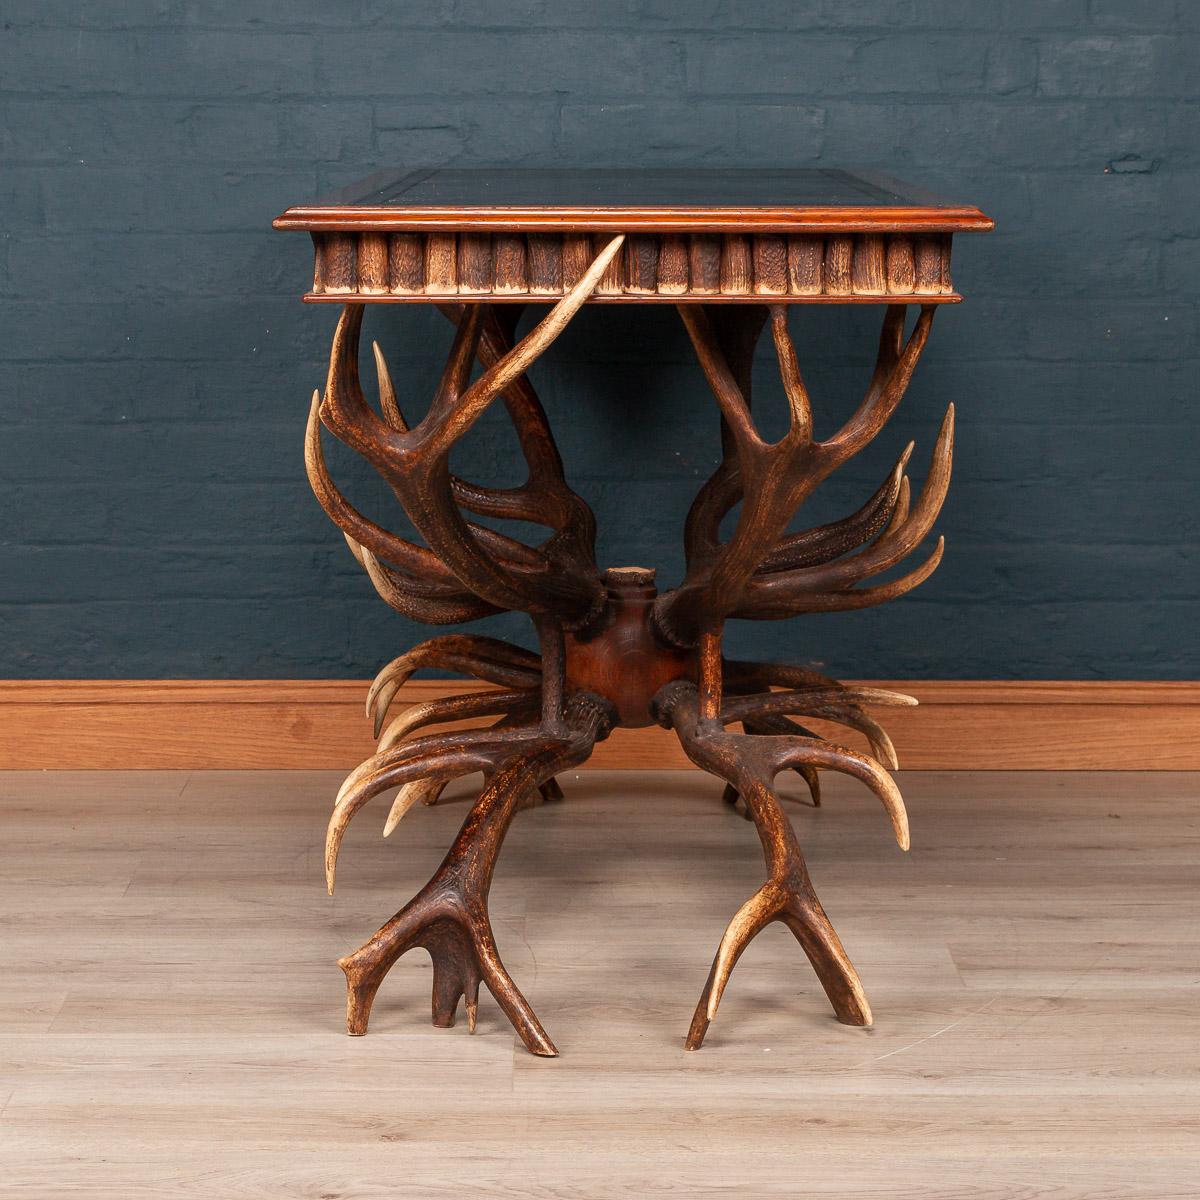 An extremely unusual mid-20th century library table by Anthony Redmile. The side of the table profusely decorated with sections of antler Horn and the table leg fashioned from whole antlers. The British designer Anthony Redmile was known in the